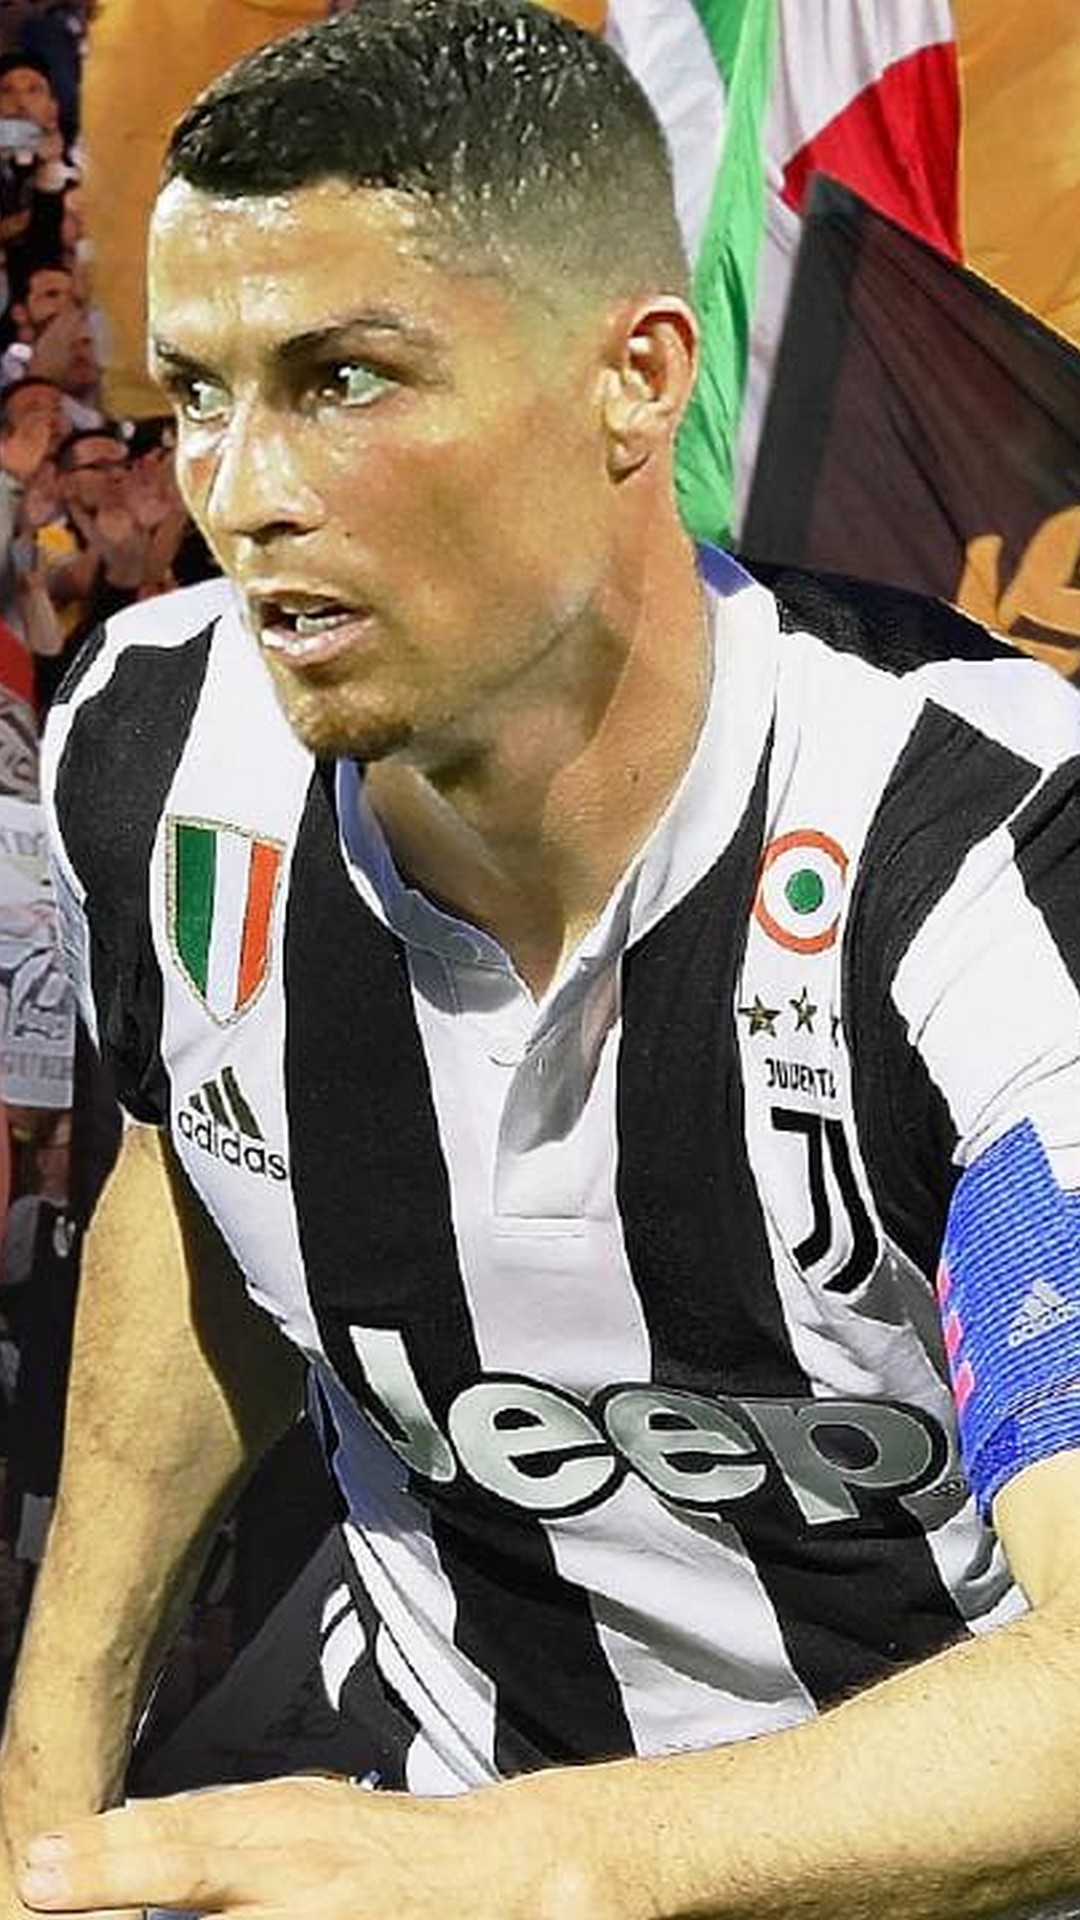 Wallpaper Android CR7 Juventus with image resolution 1080x1920 pixel. You can make this wallpaper for your Android backgrounds, Tablet, Smartphones Screensavers and Mobile Phone Lock Screen